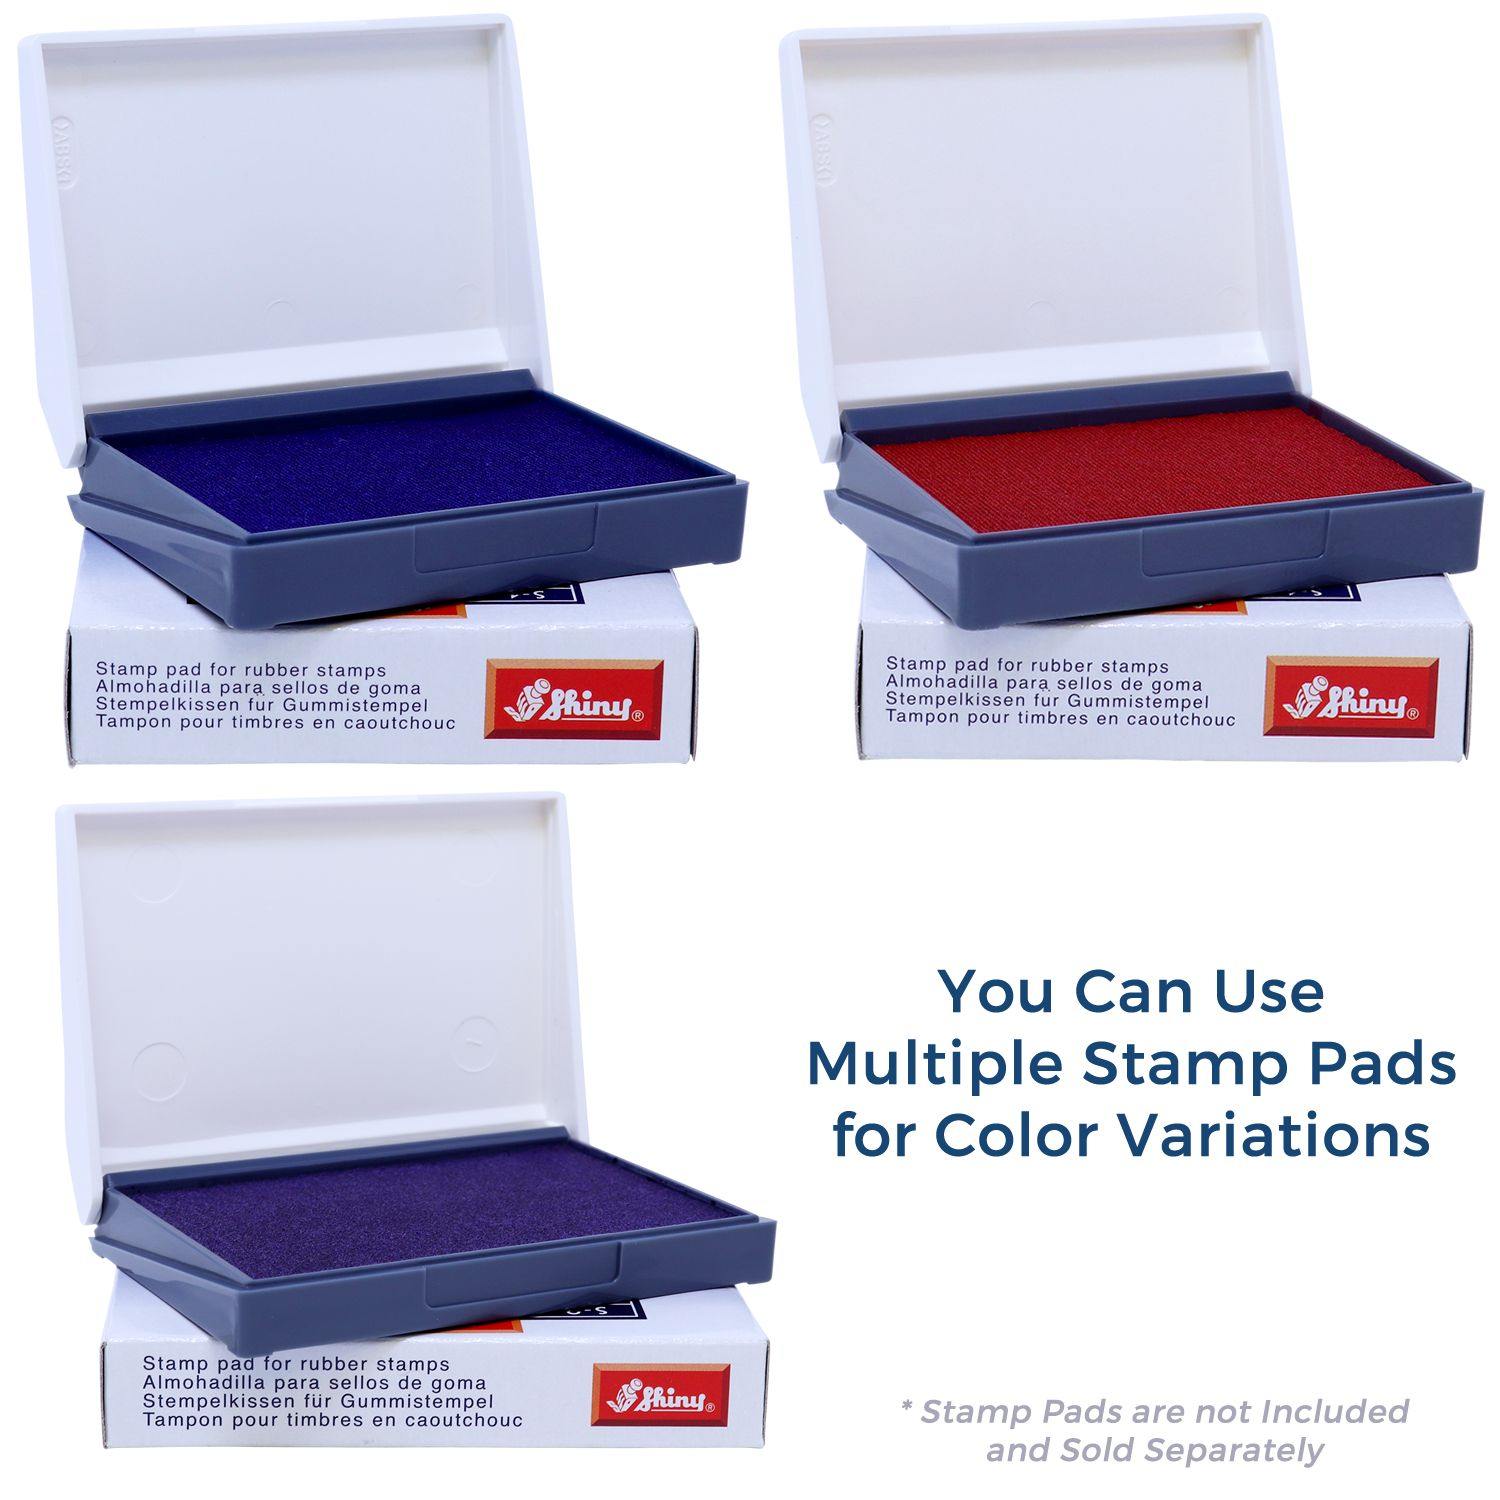 Stamp Pads for Large Judge's Copy Rubber Stamp Available